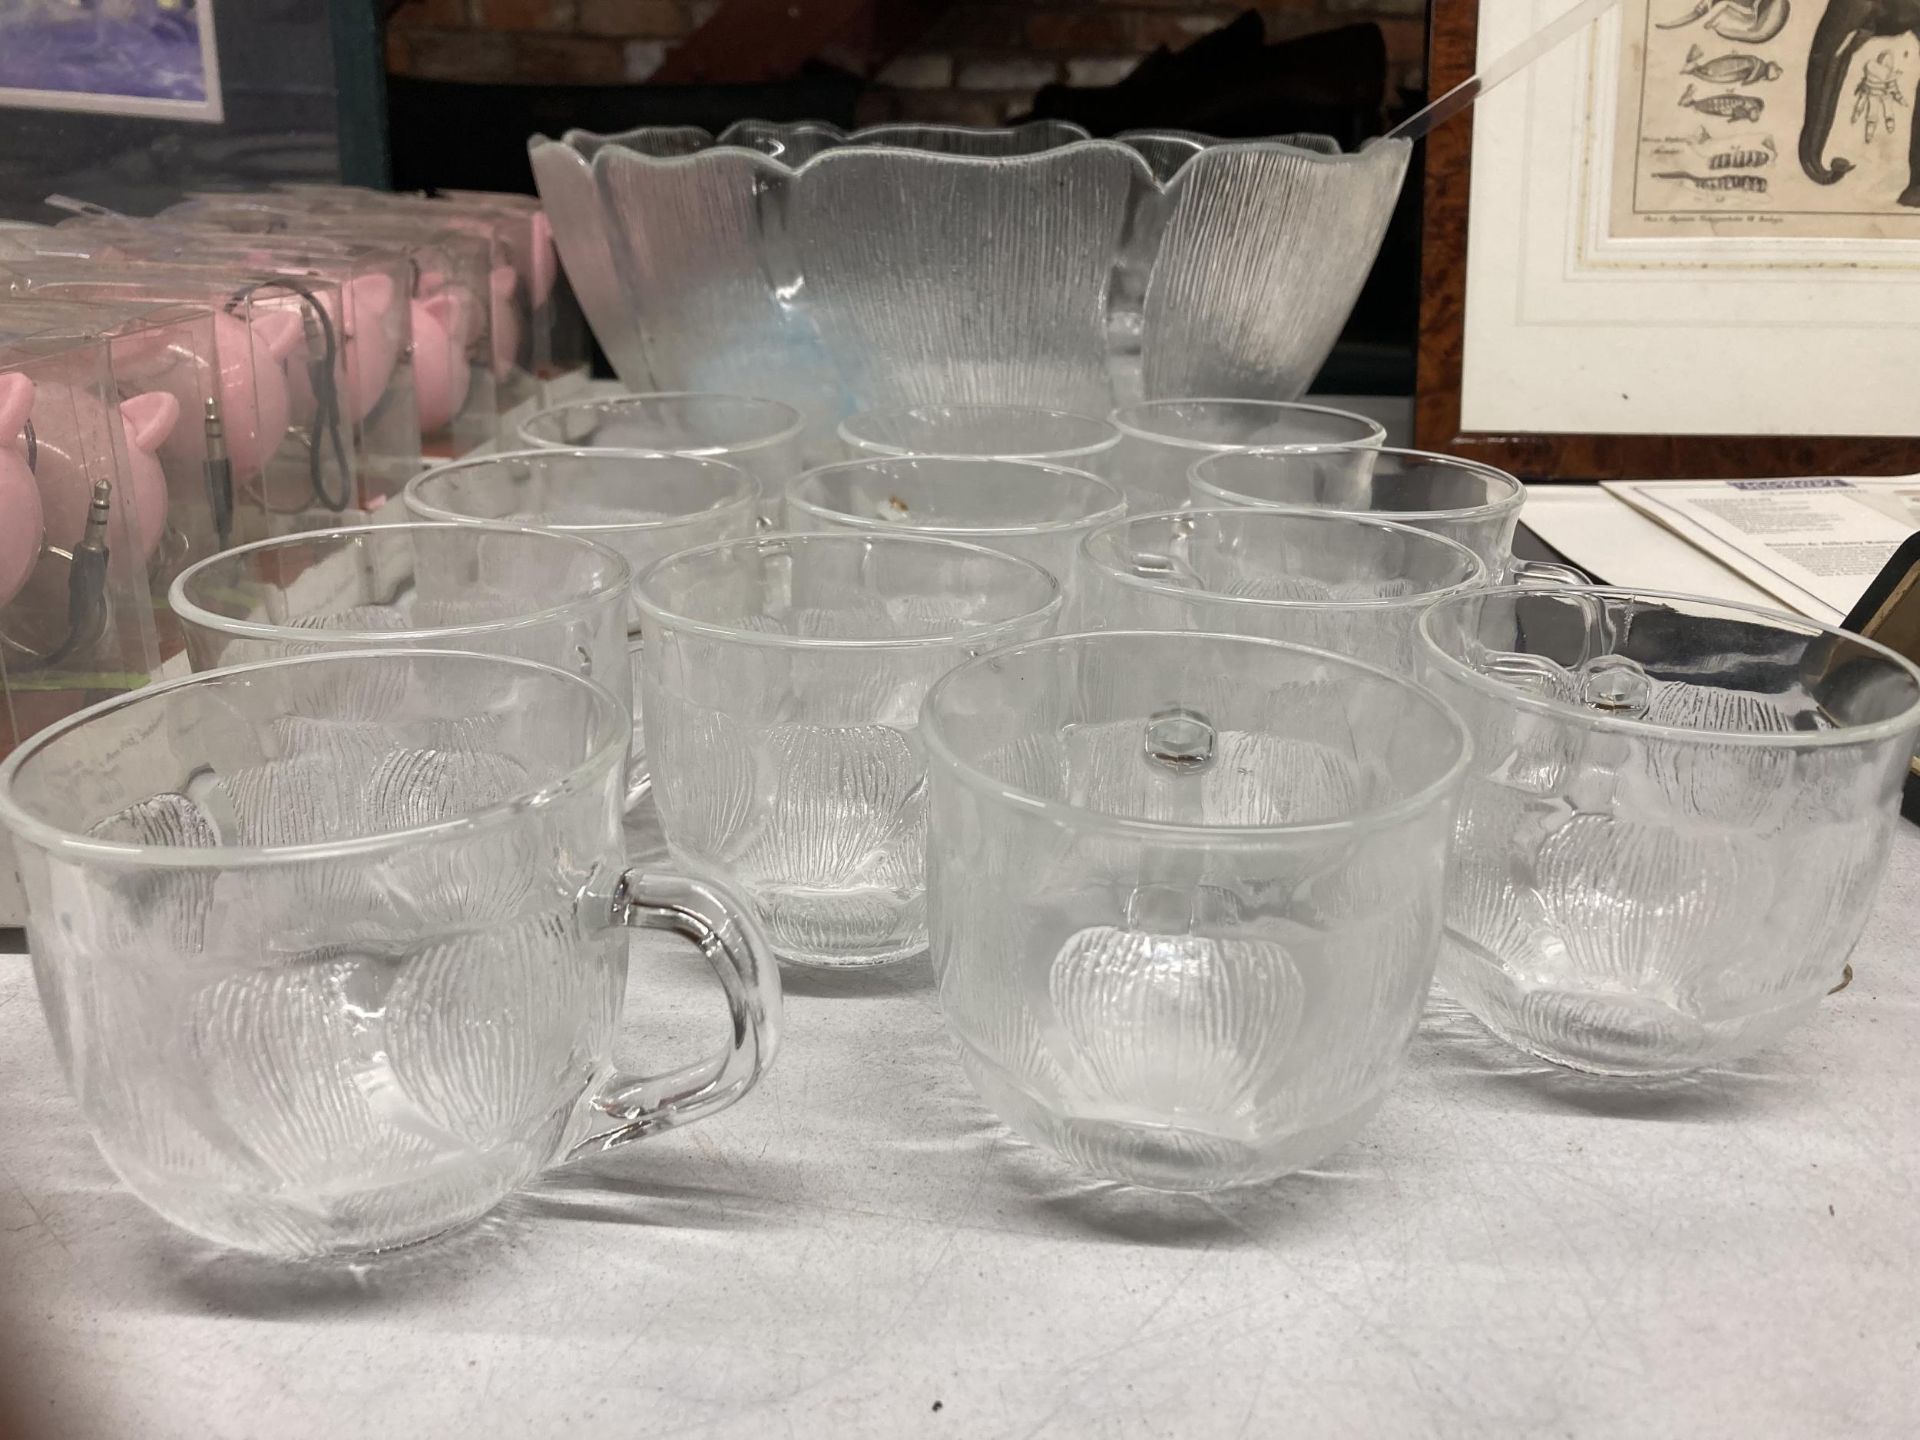 A GLASS PUNCHBOWL WITH CUPS - Image 2 of 2